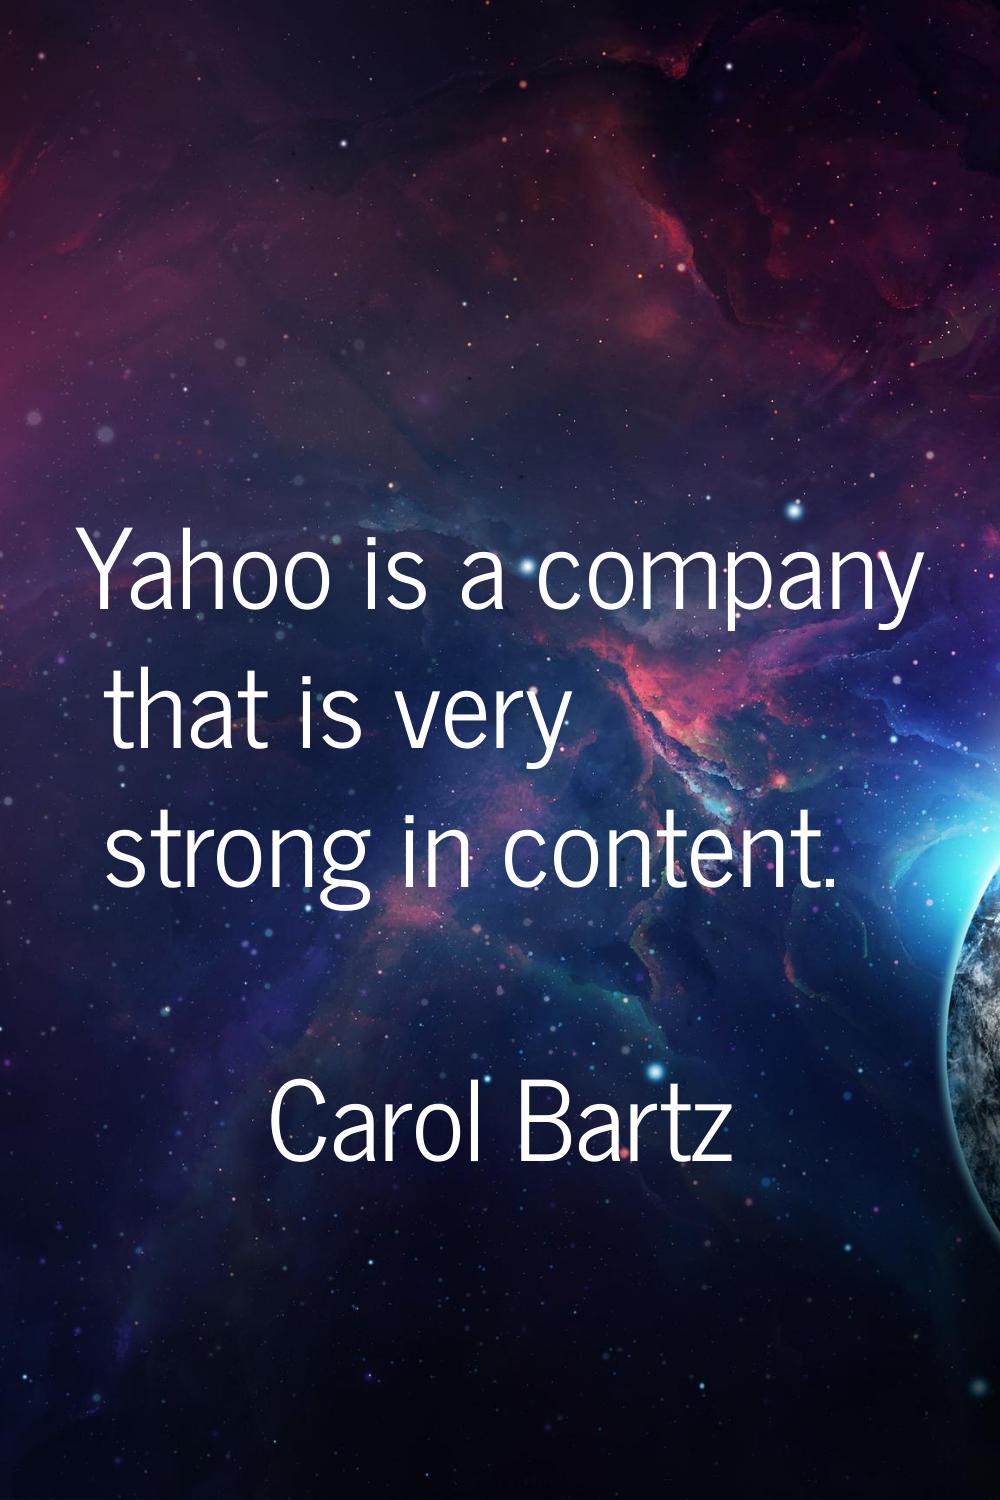 Yahoo is a company that is very strong in content.